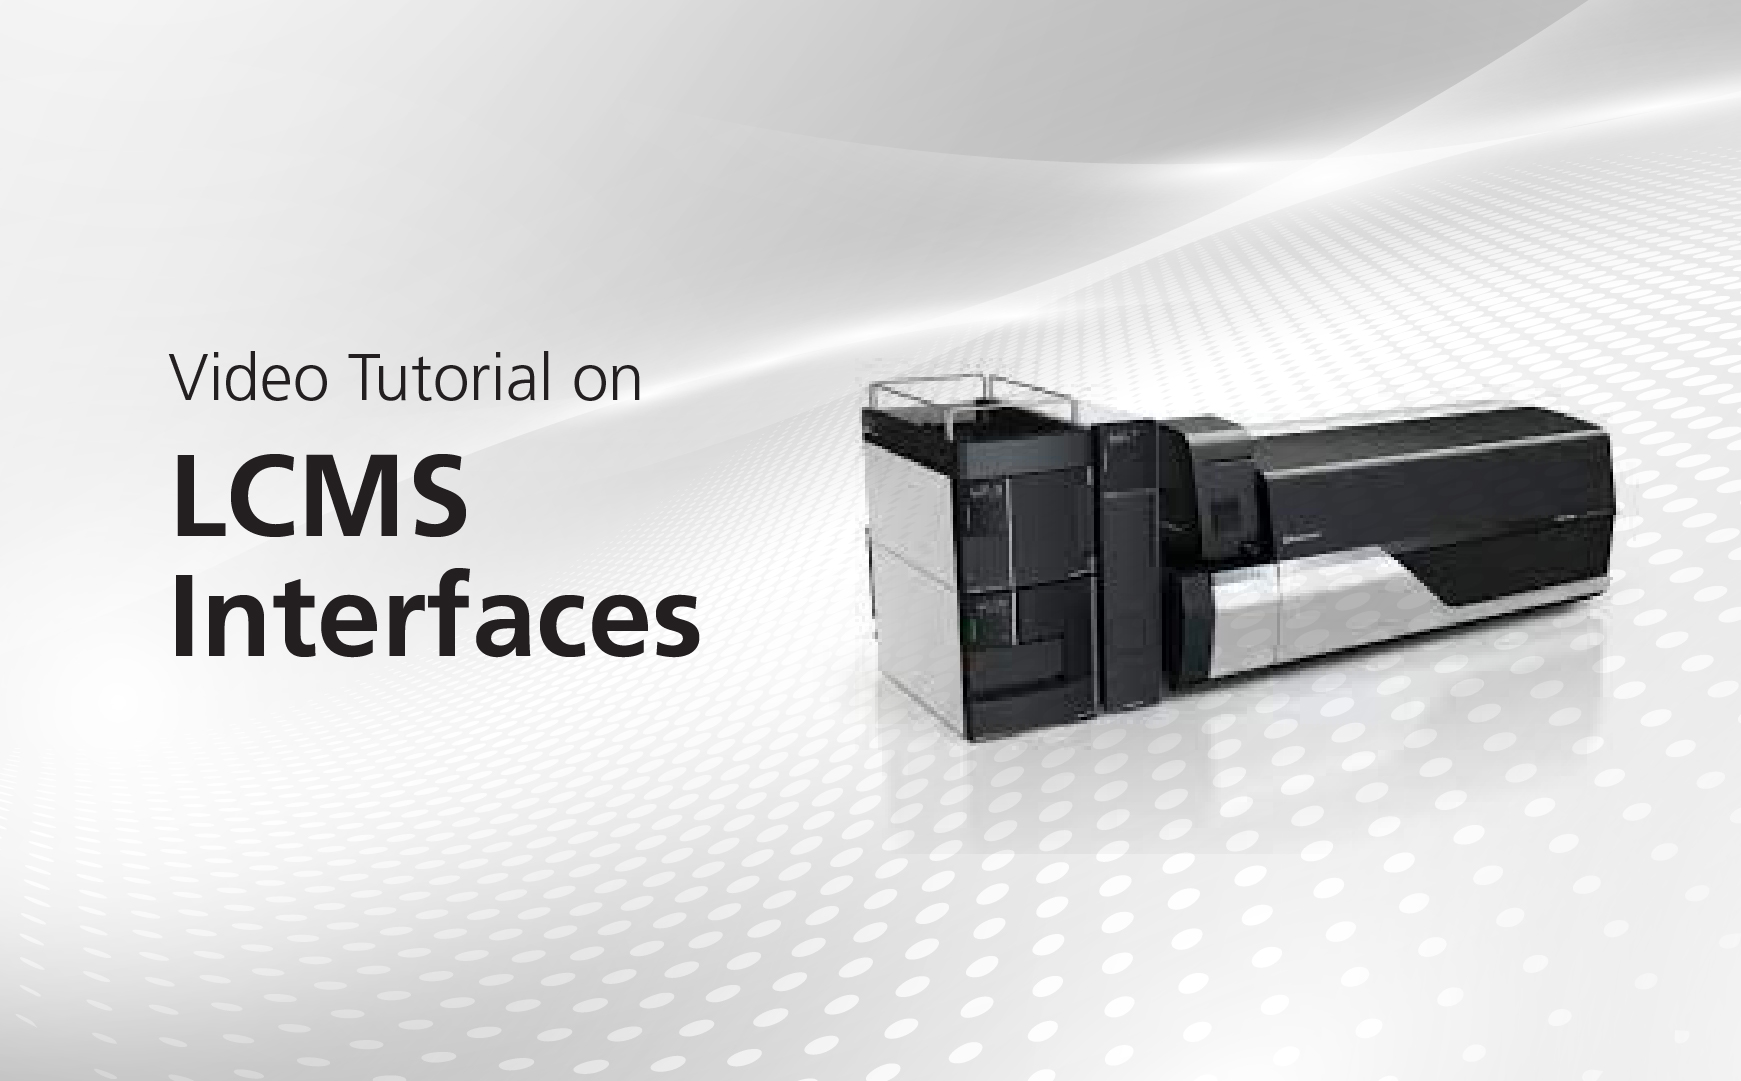 Video Tutorial on LCMS Interfaces